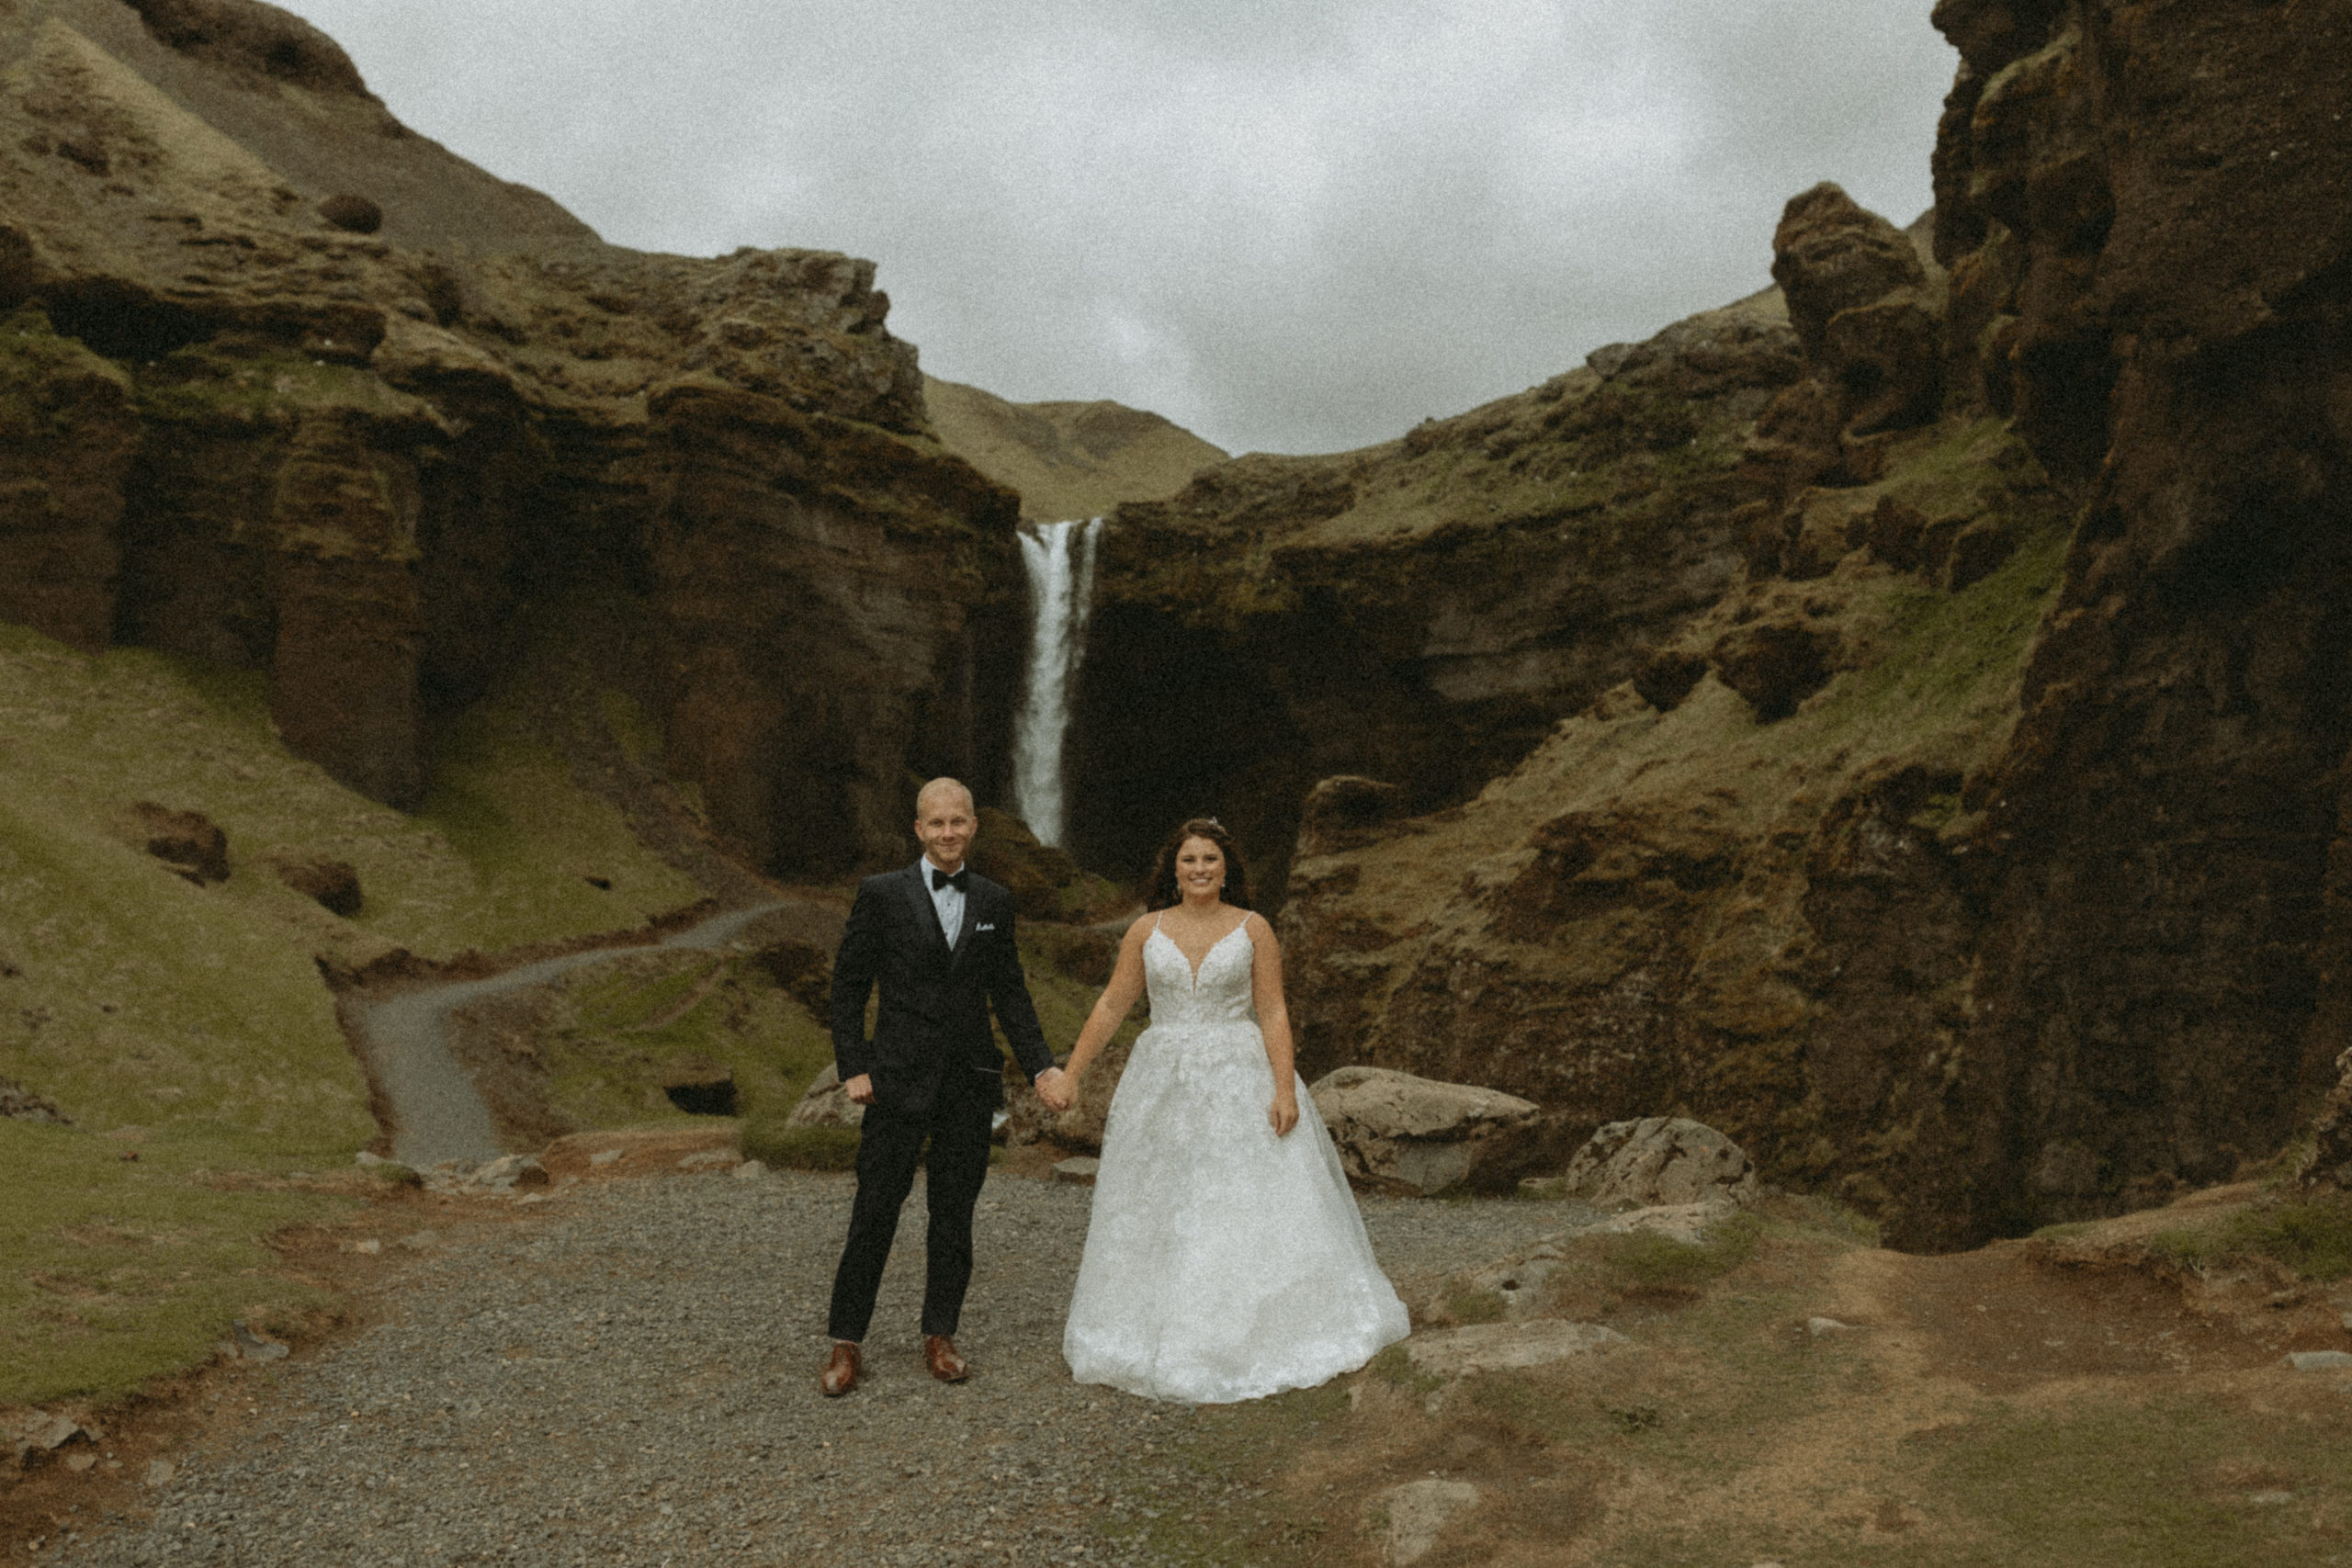 Bride and groom standing in Iceland canyon on wedding day with a waterfall behind them.